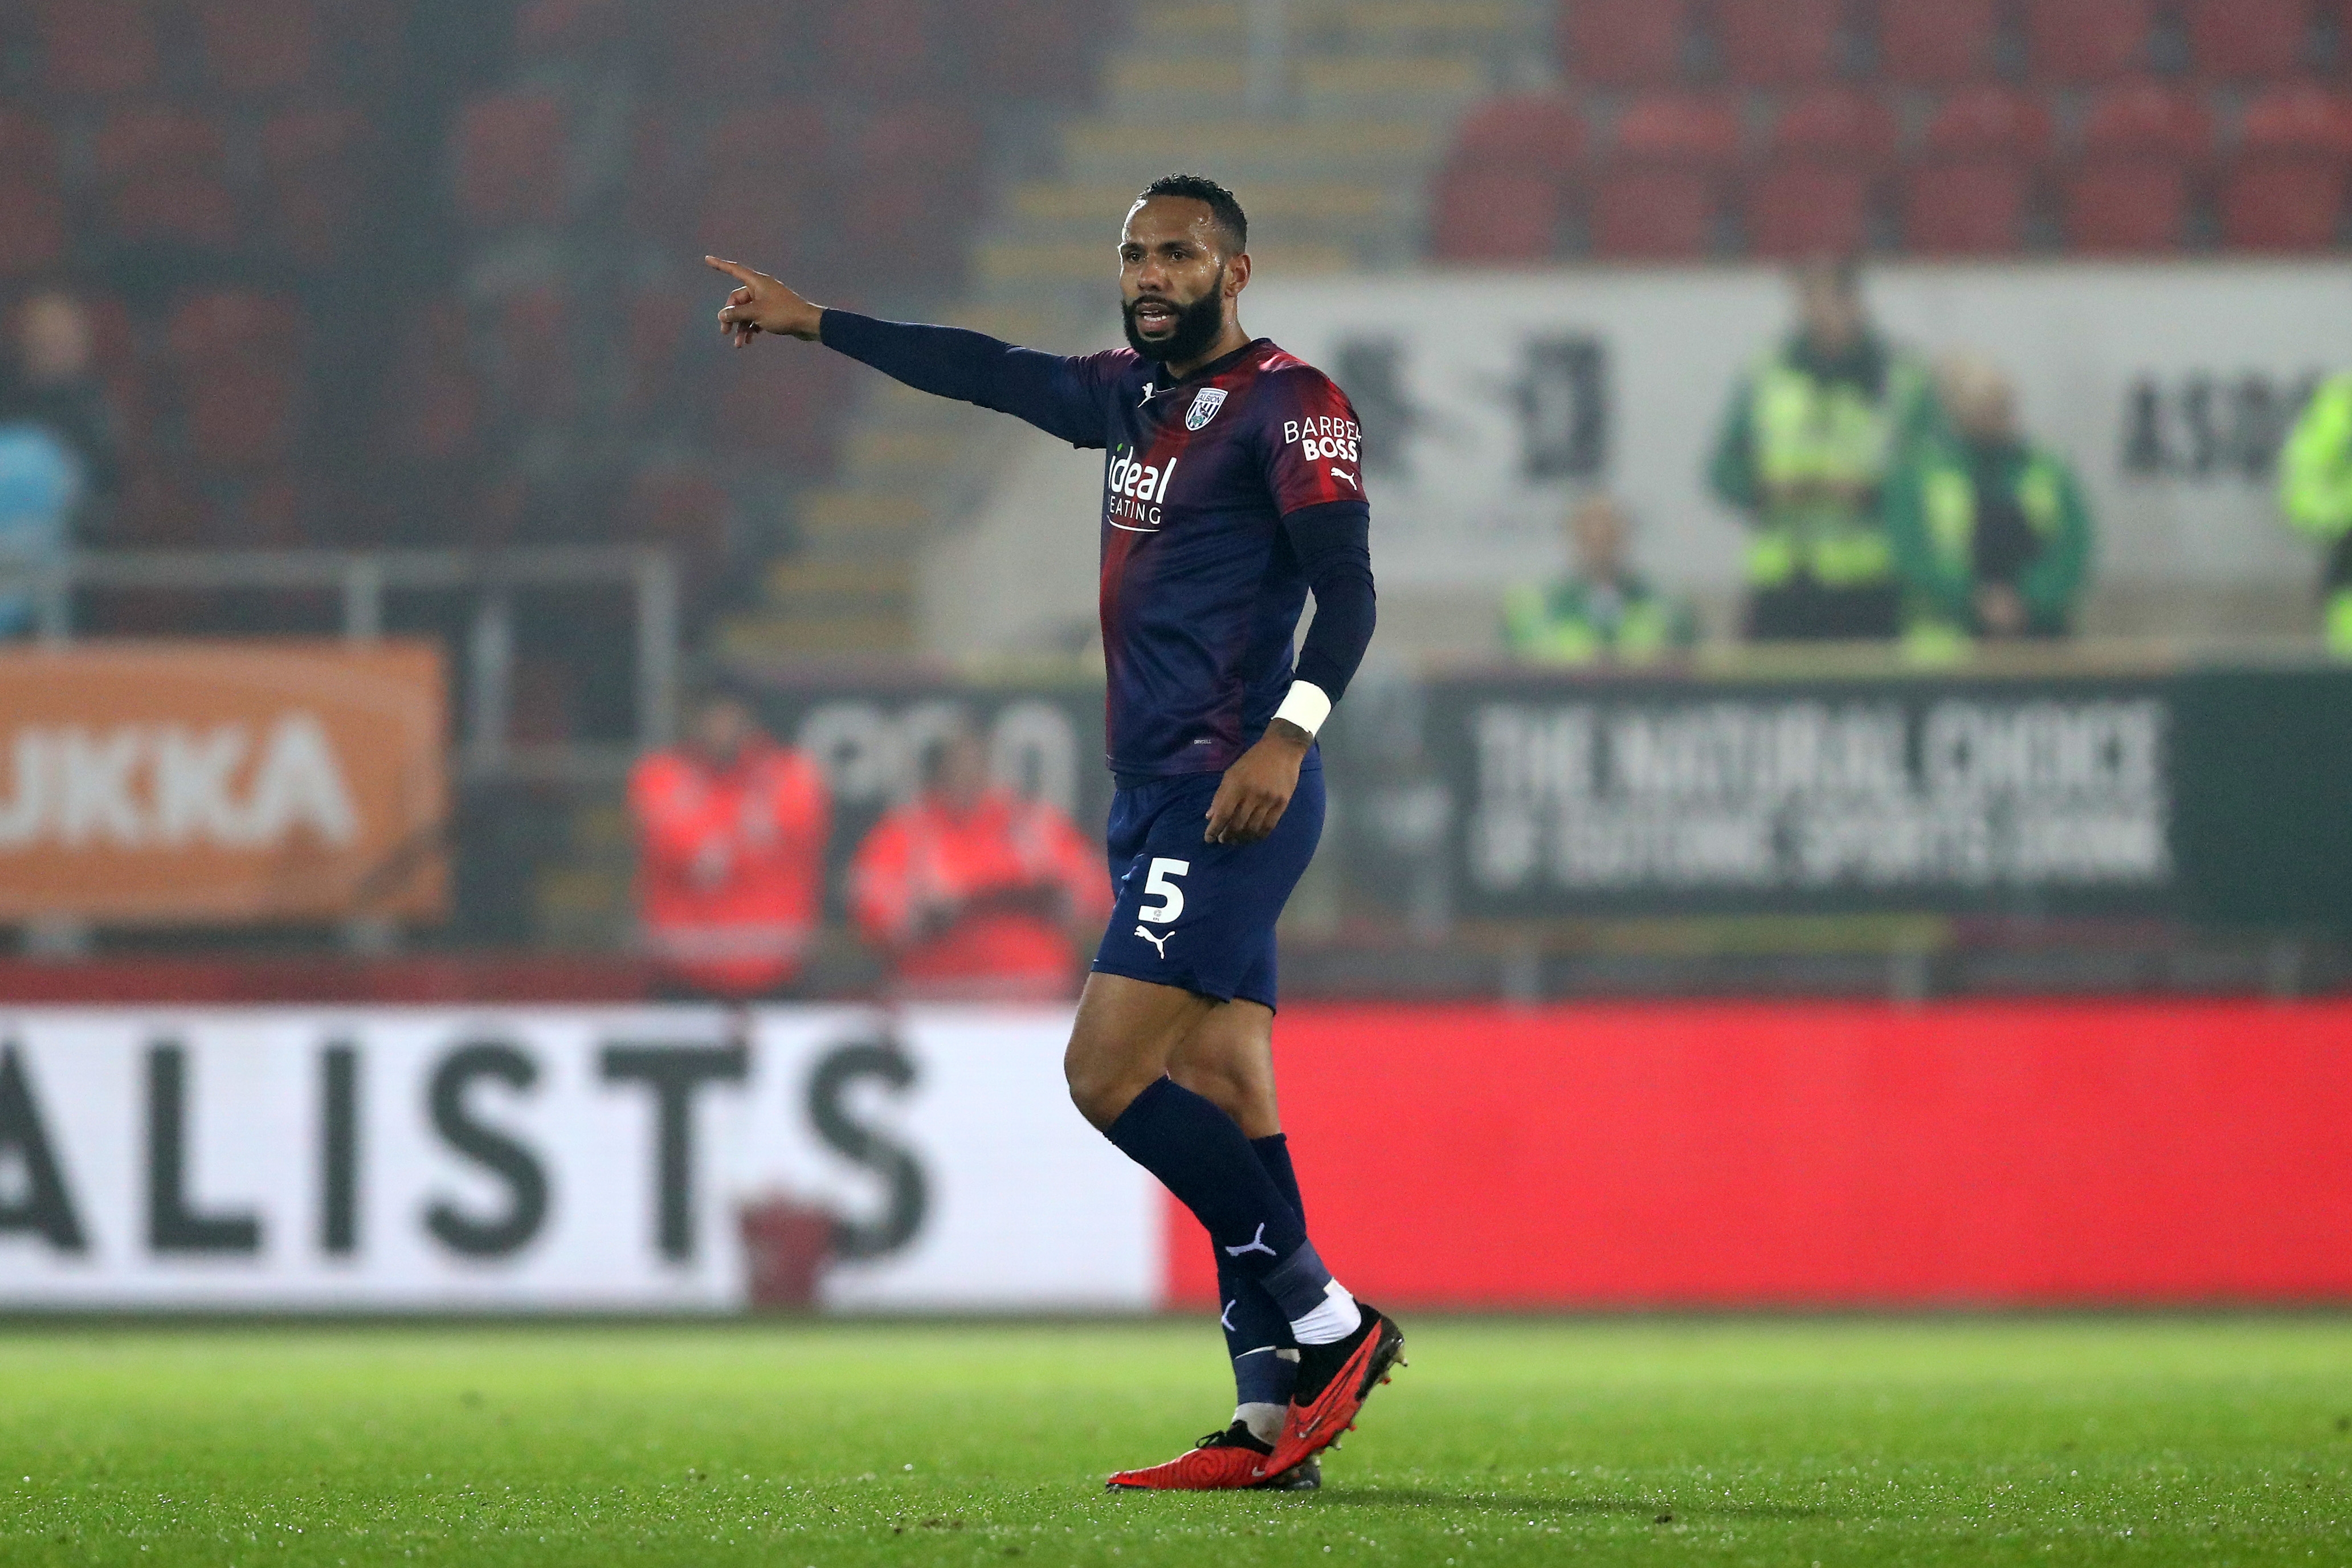 Kyle Bartley pointing to his right against Rotherham